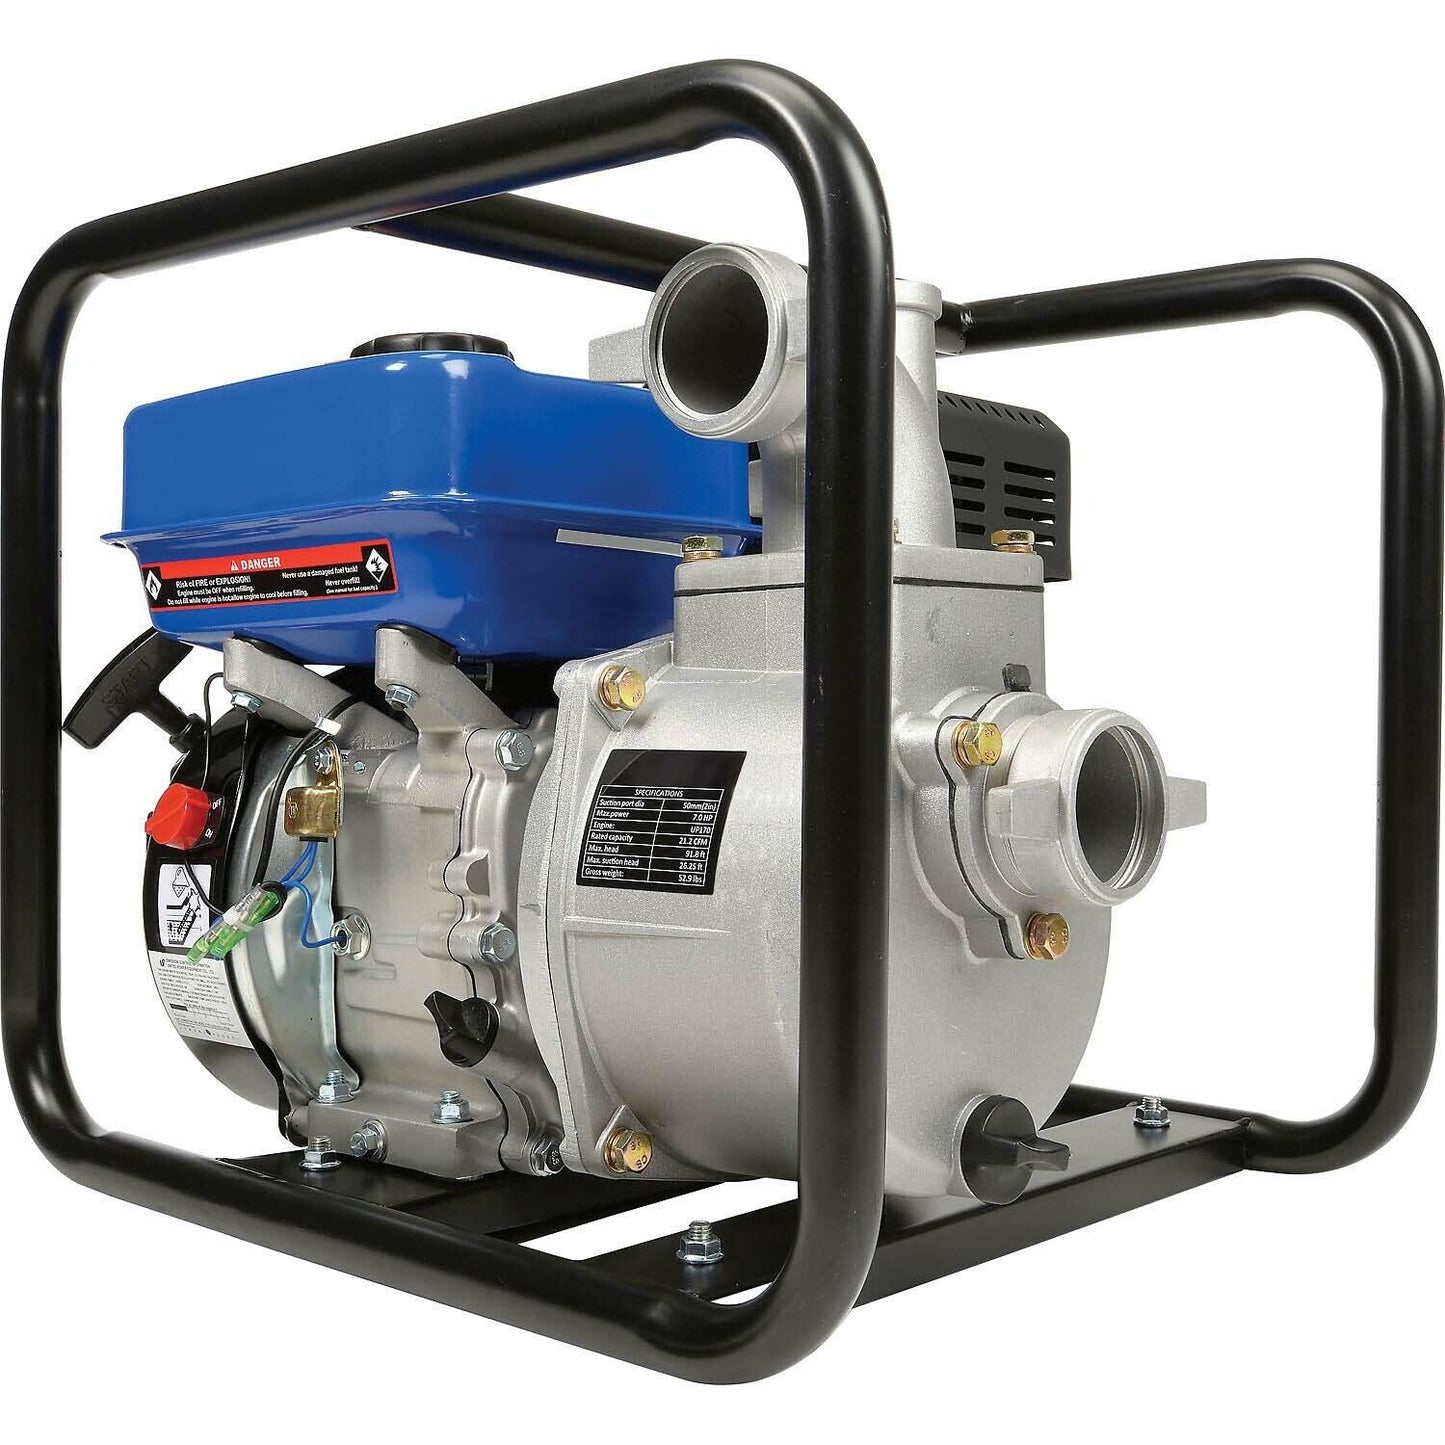 Portable WATER PUMP - 2" In and Out - 158 GPM - 7 HP - Gas Engine - 92 ft Head